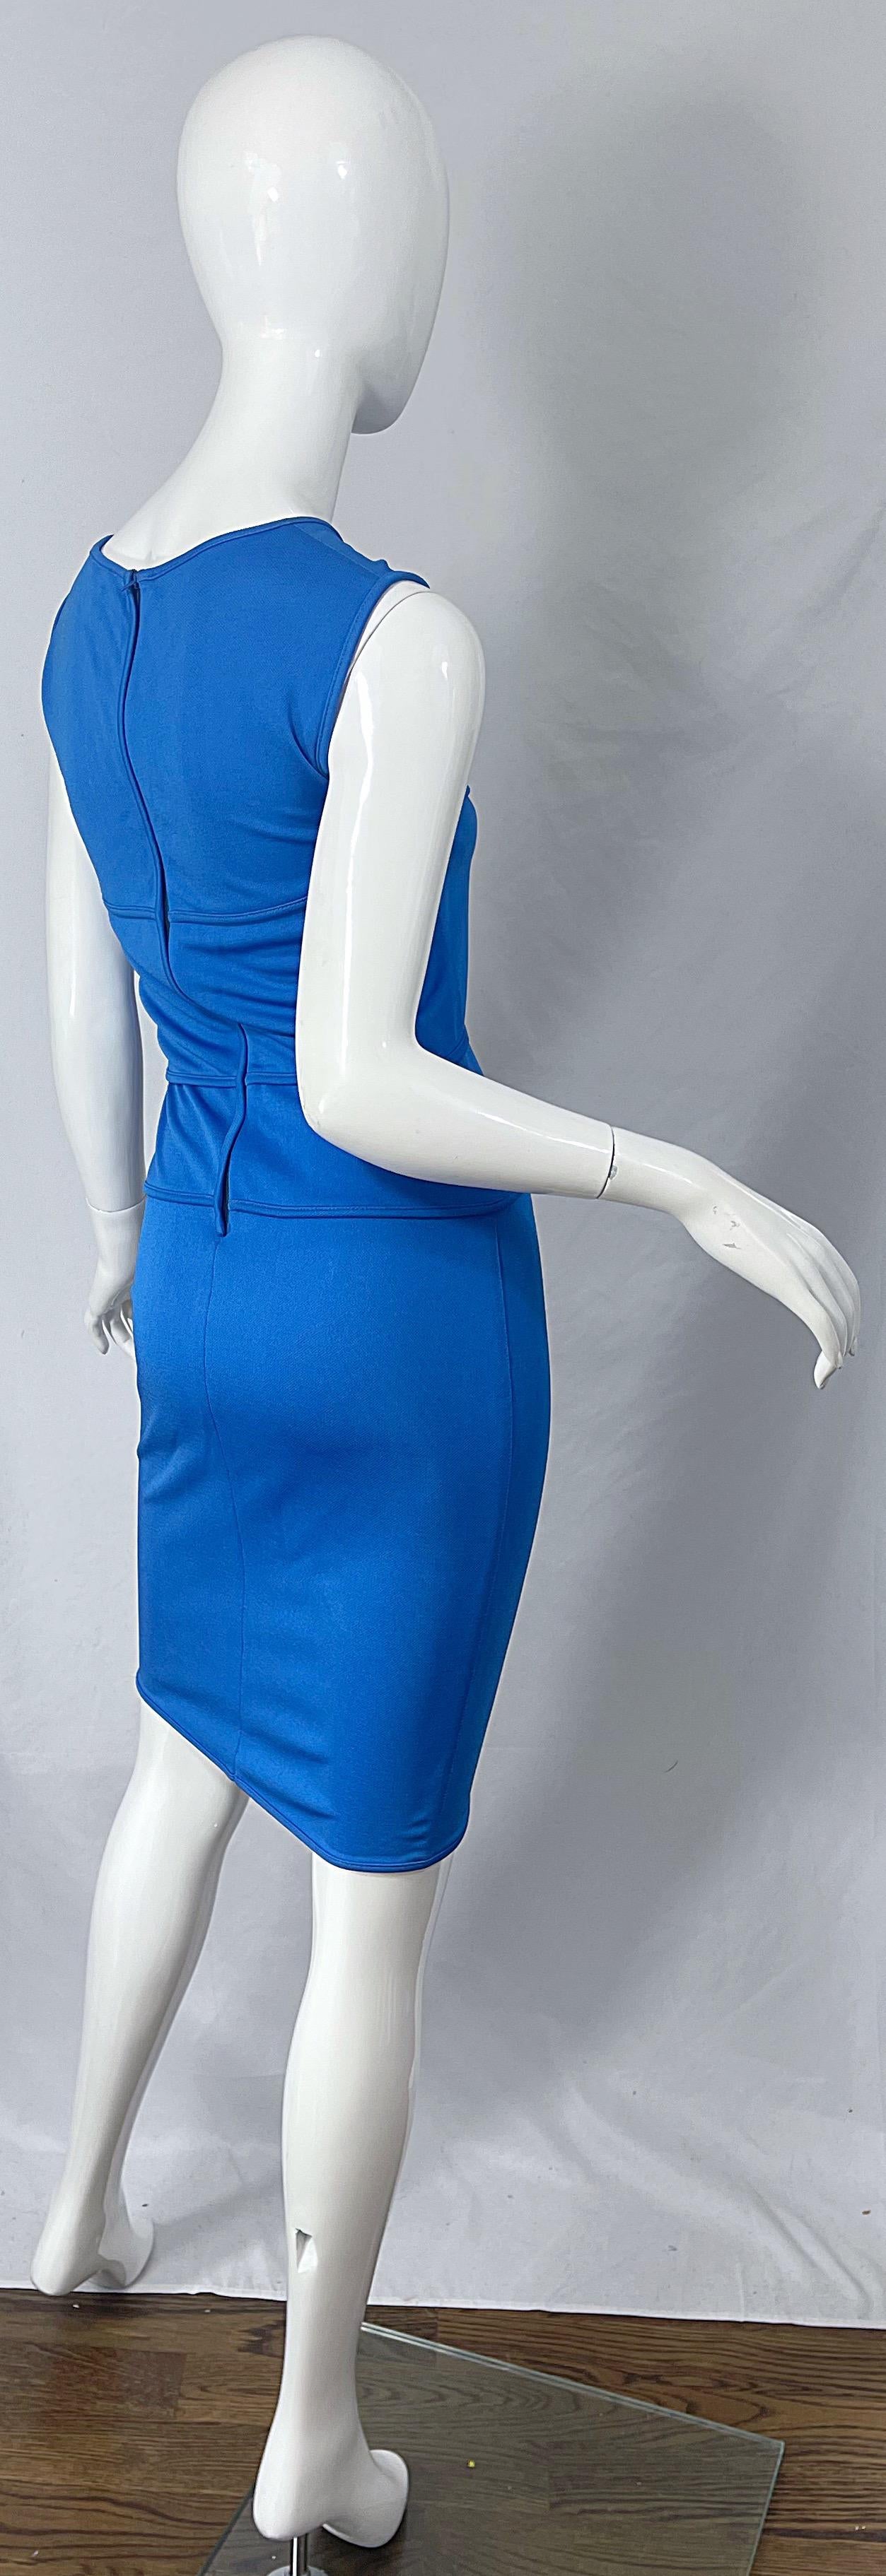 Thierry Mugler 1990s Blue Cut Out Vintage Body Con 90s Dress Size 44 / 6 - 8 For Sale 6